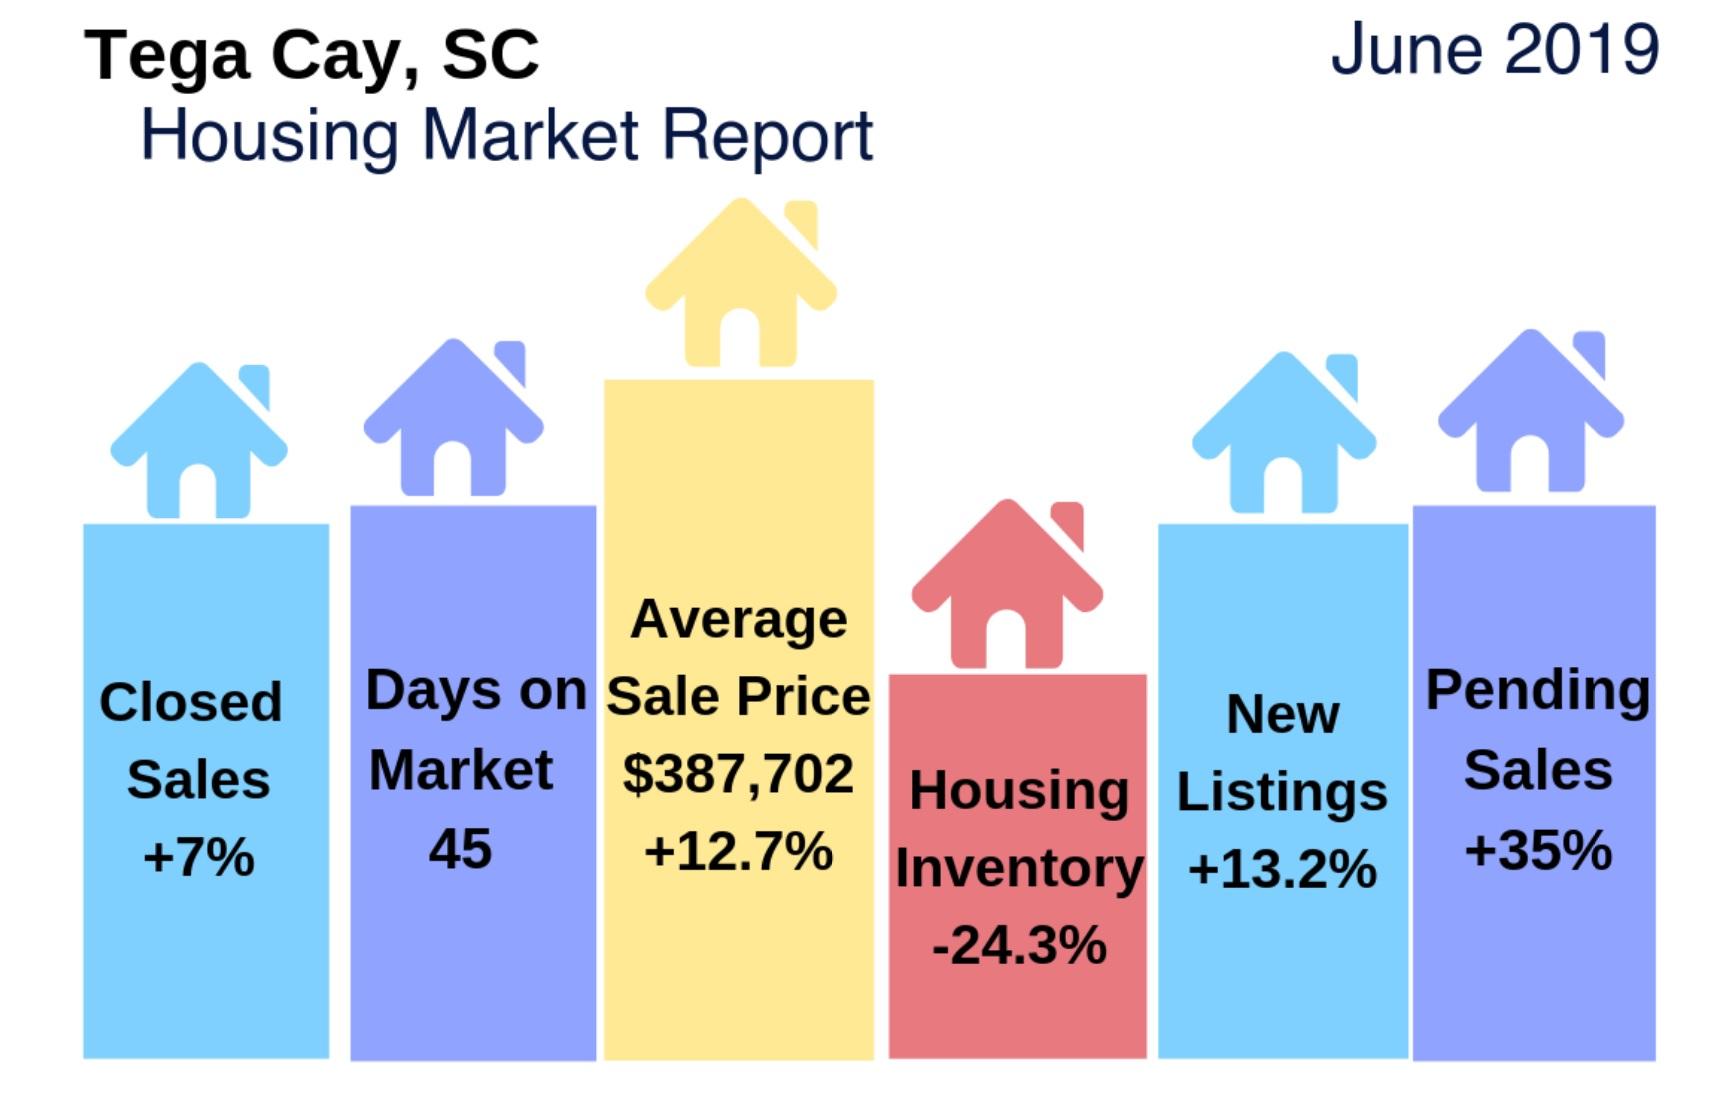 Fort Mill/Tega Cay Housing Markets: June 2019. How Did They Do?